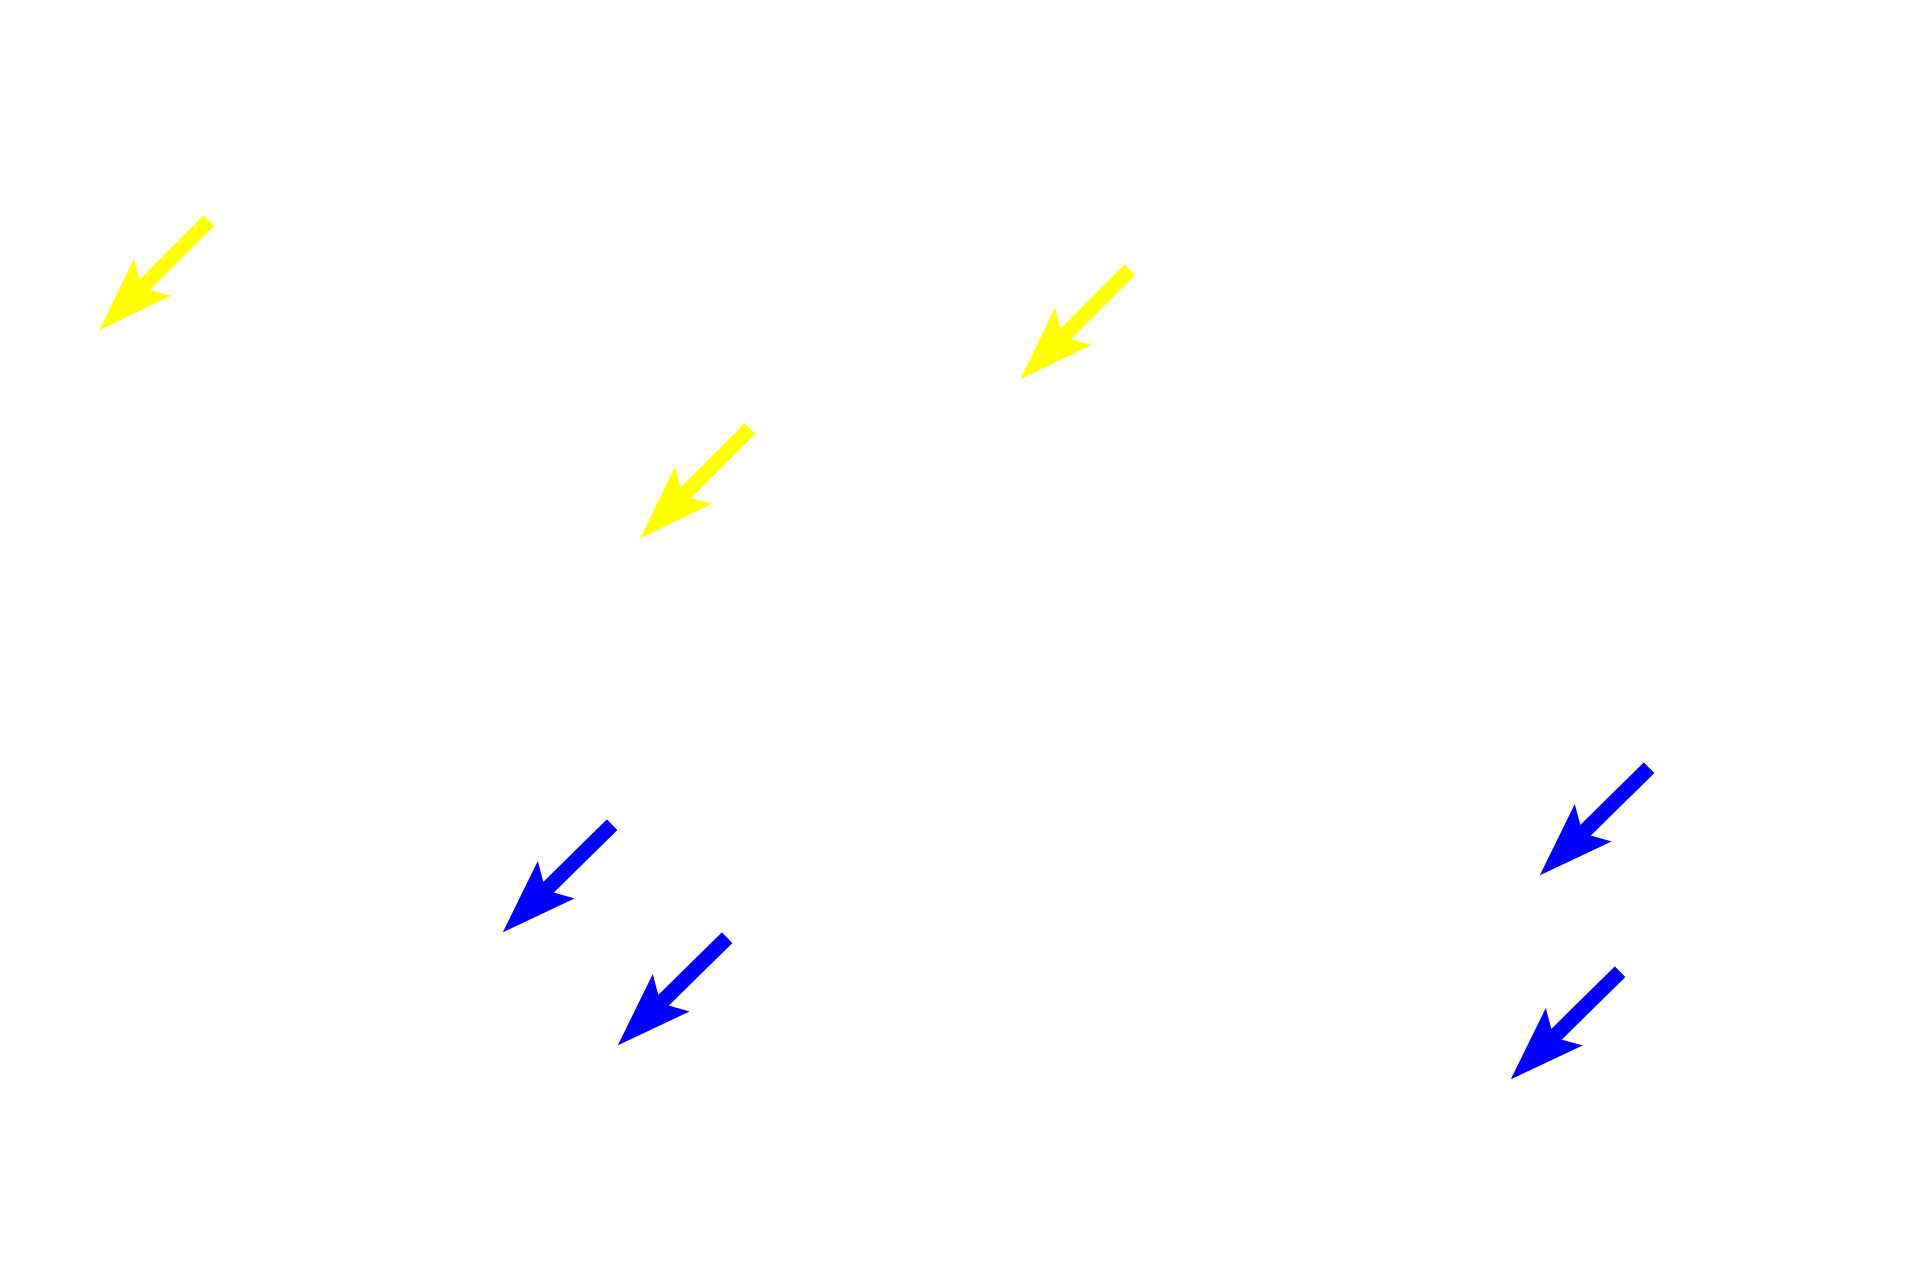  - Nuclear bag fibers <p>Intrafusal fibers are multinucleated with nuclei occupying the central regions of the cell.  Nuclear chain fibers are slender and have nuclei arranged end-to-end in a chain-like fashion.  Nuclear bag fibers are larger and their nuclei cluster centrally, giving the mid-region a swollen appearance.</p>
